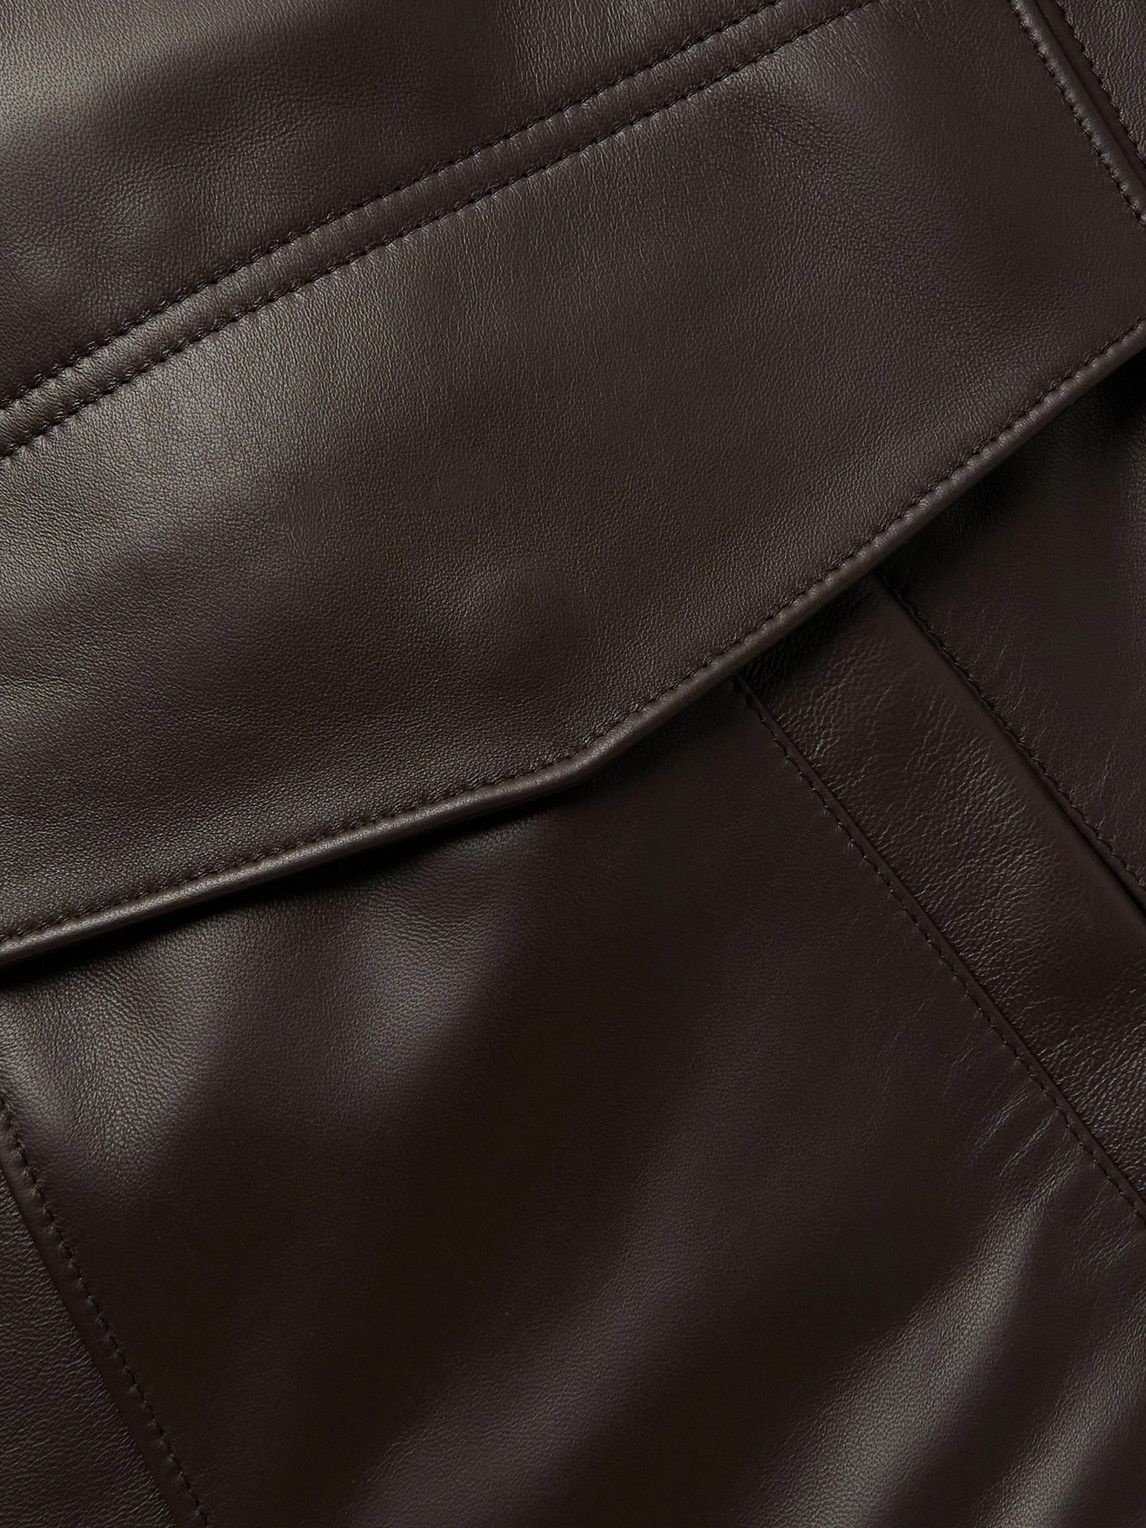 Canali - Leather Jacket - Brown Canali